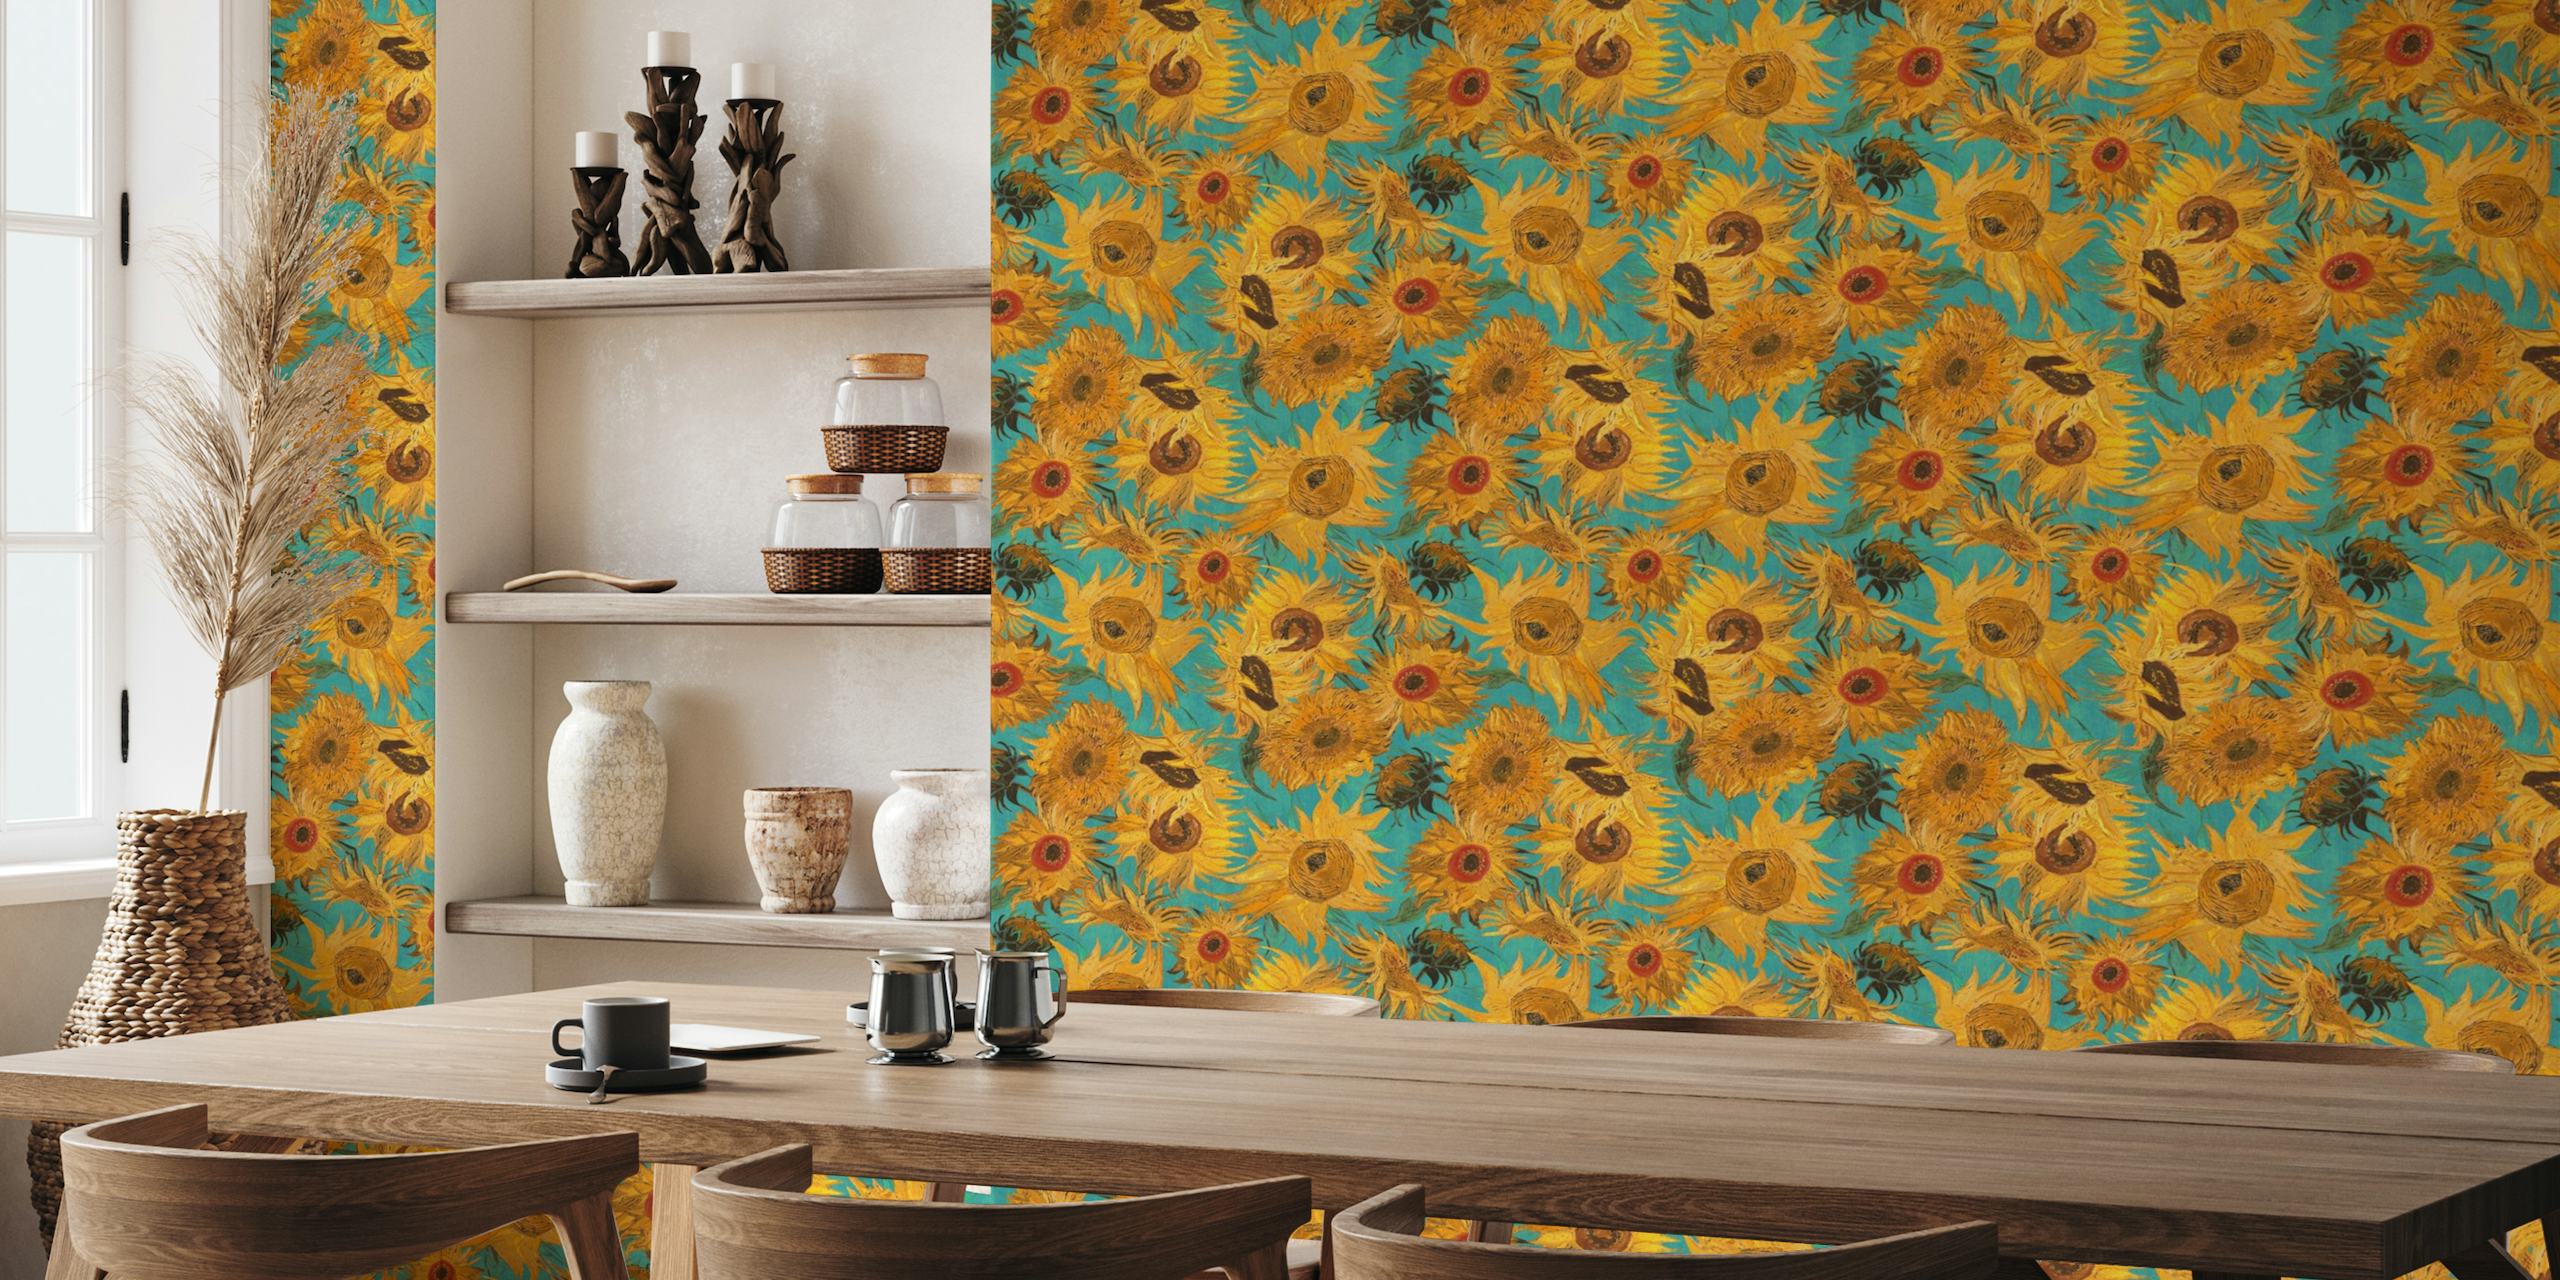 Van Gogh Sunflowers Pattern in yellow, teal, green, ochre and red wallpaper